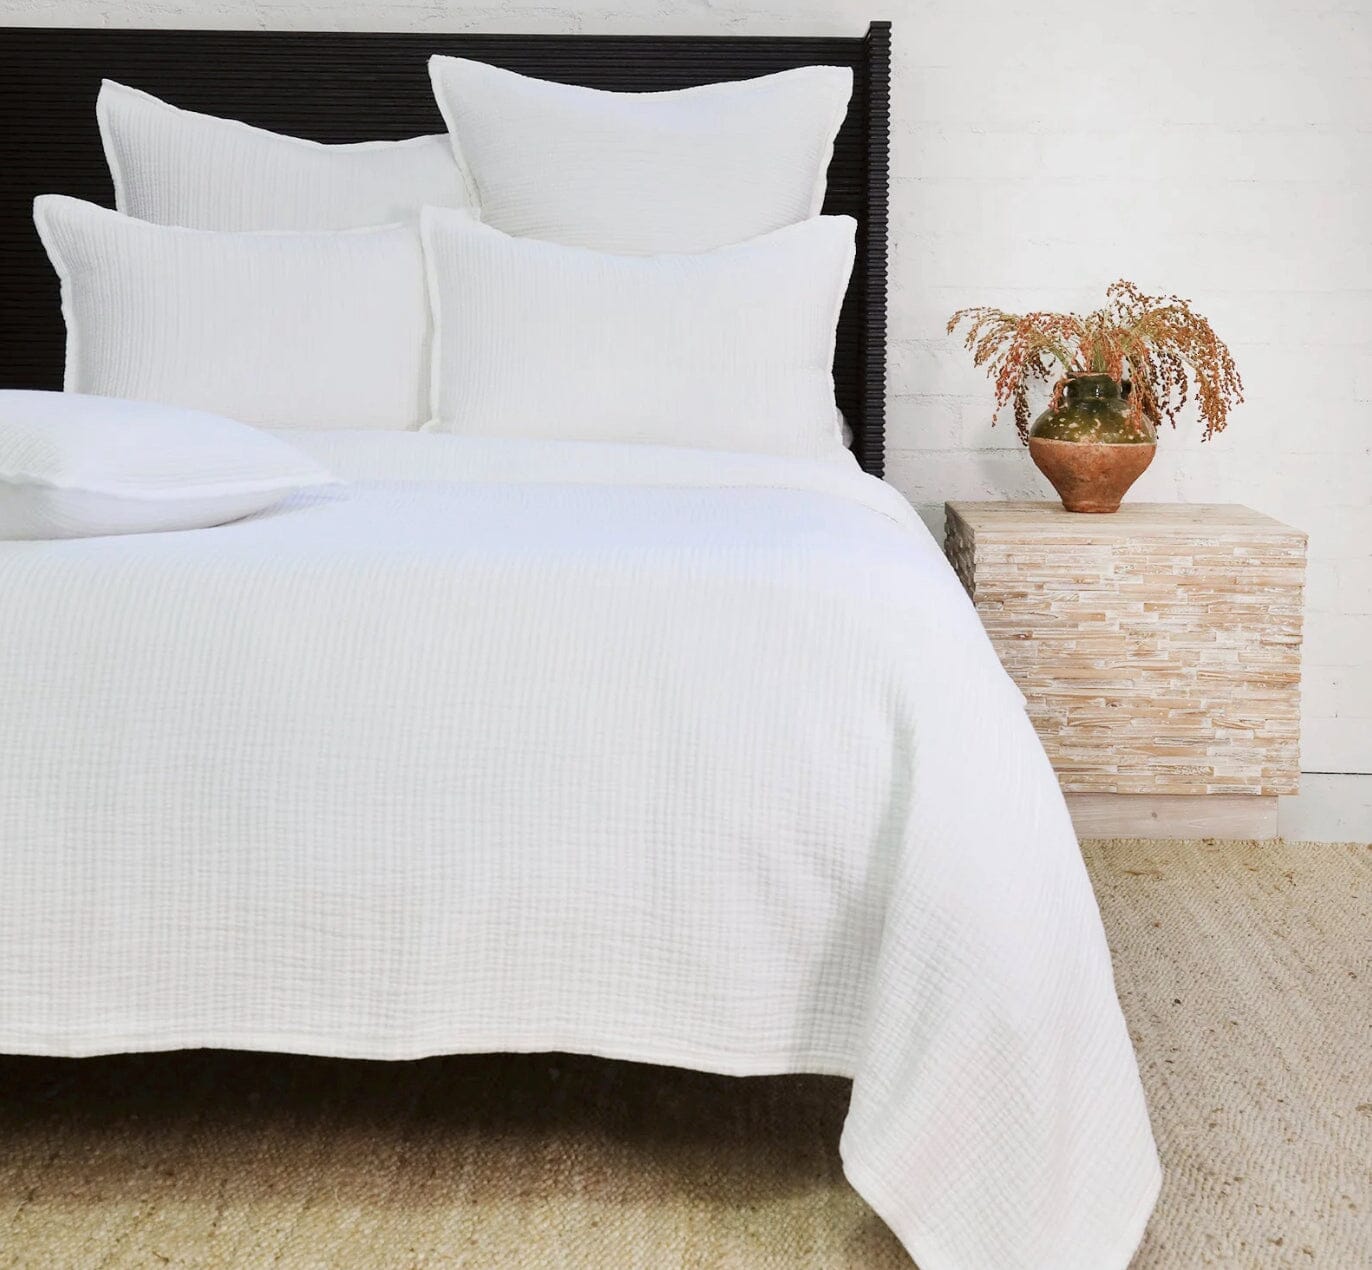 Bedspread - Chatham White Matelasse Coverlet by Pom Pom at Home